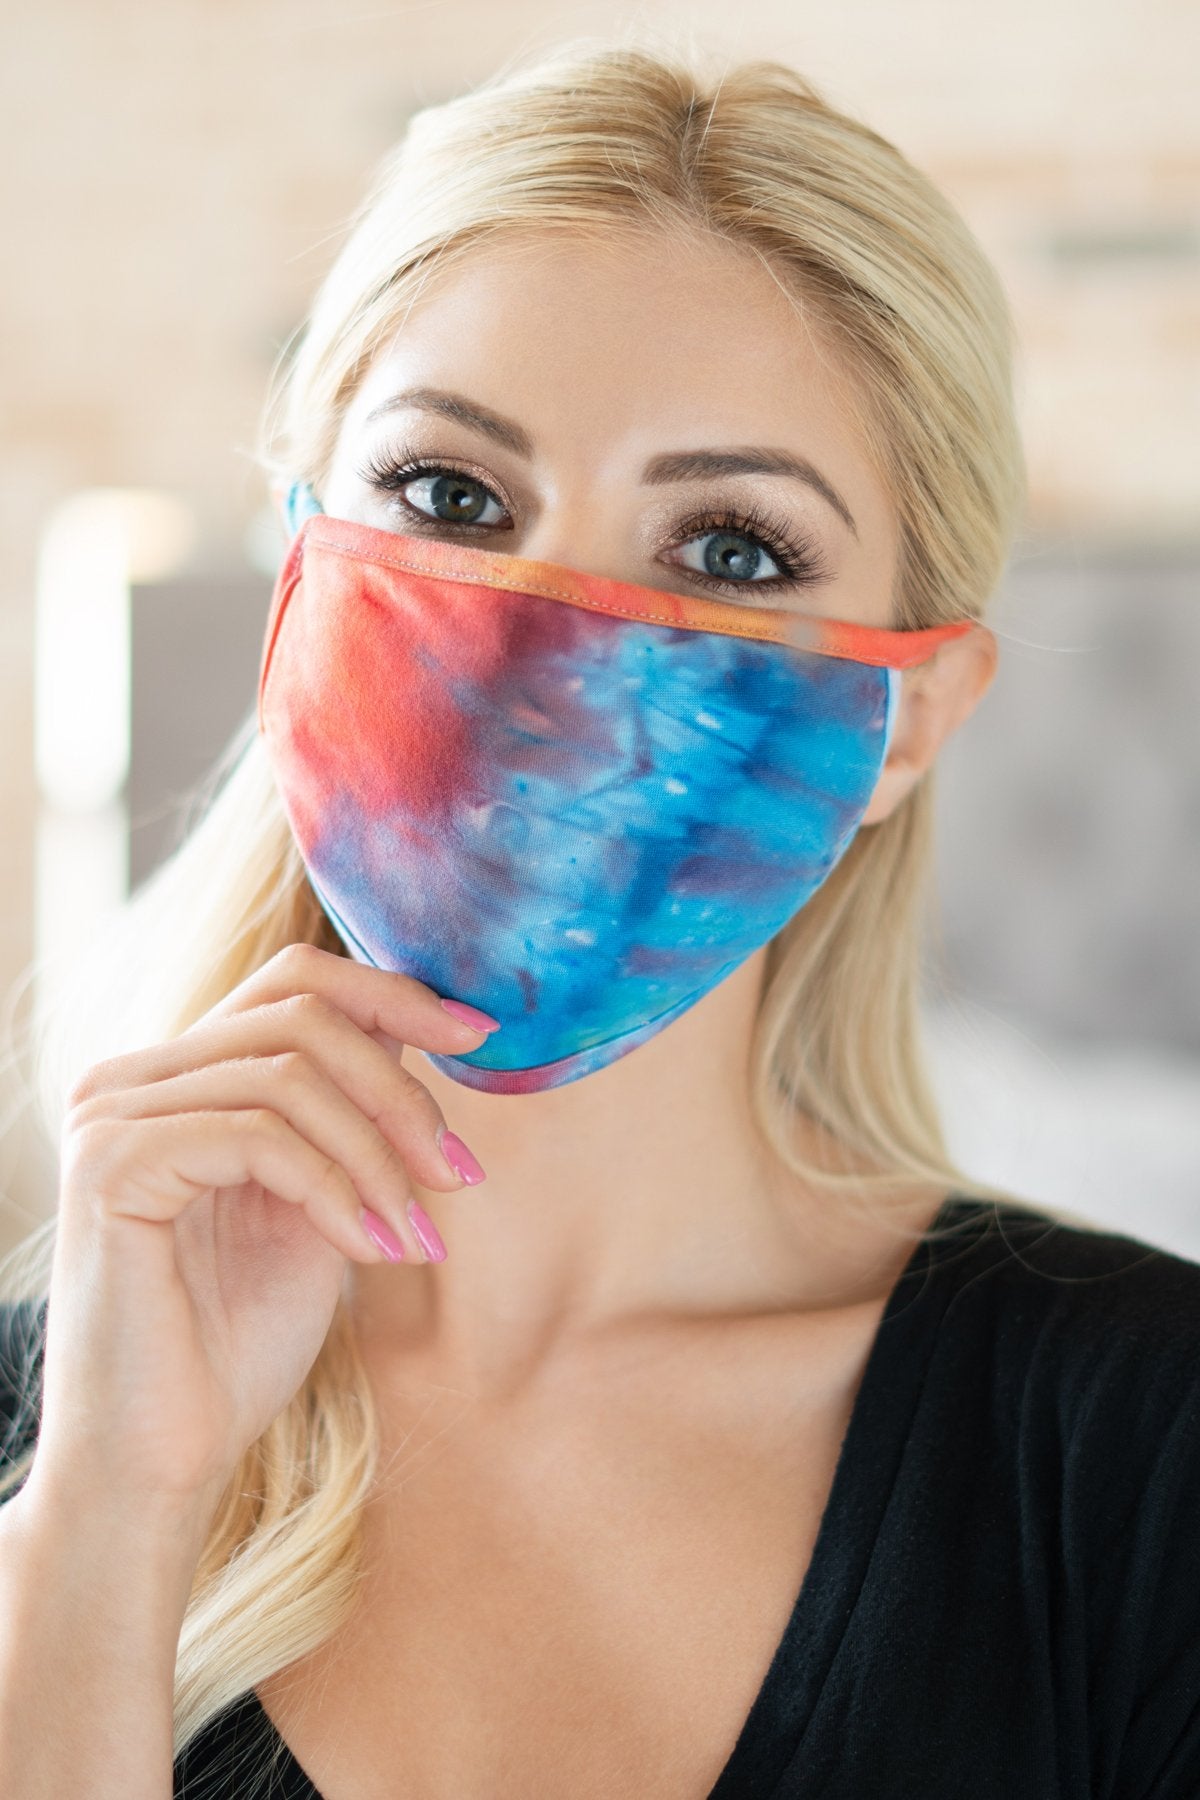 Rfm8002-Rtd023 - Tie Dye Reusable Face Mask for Adults With Filter Pocket